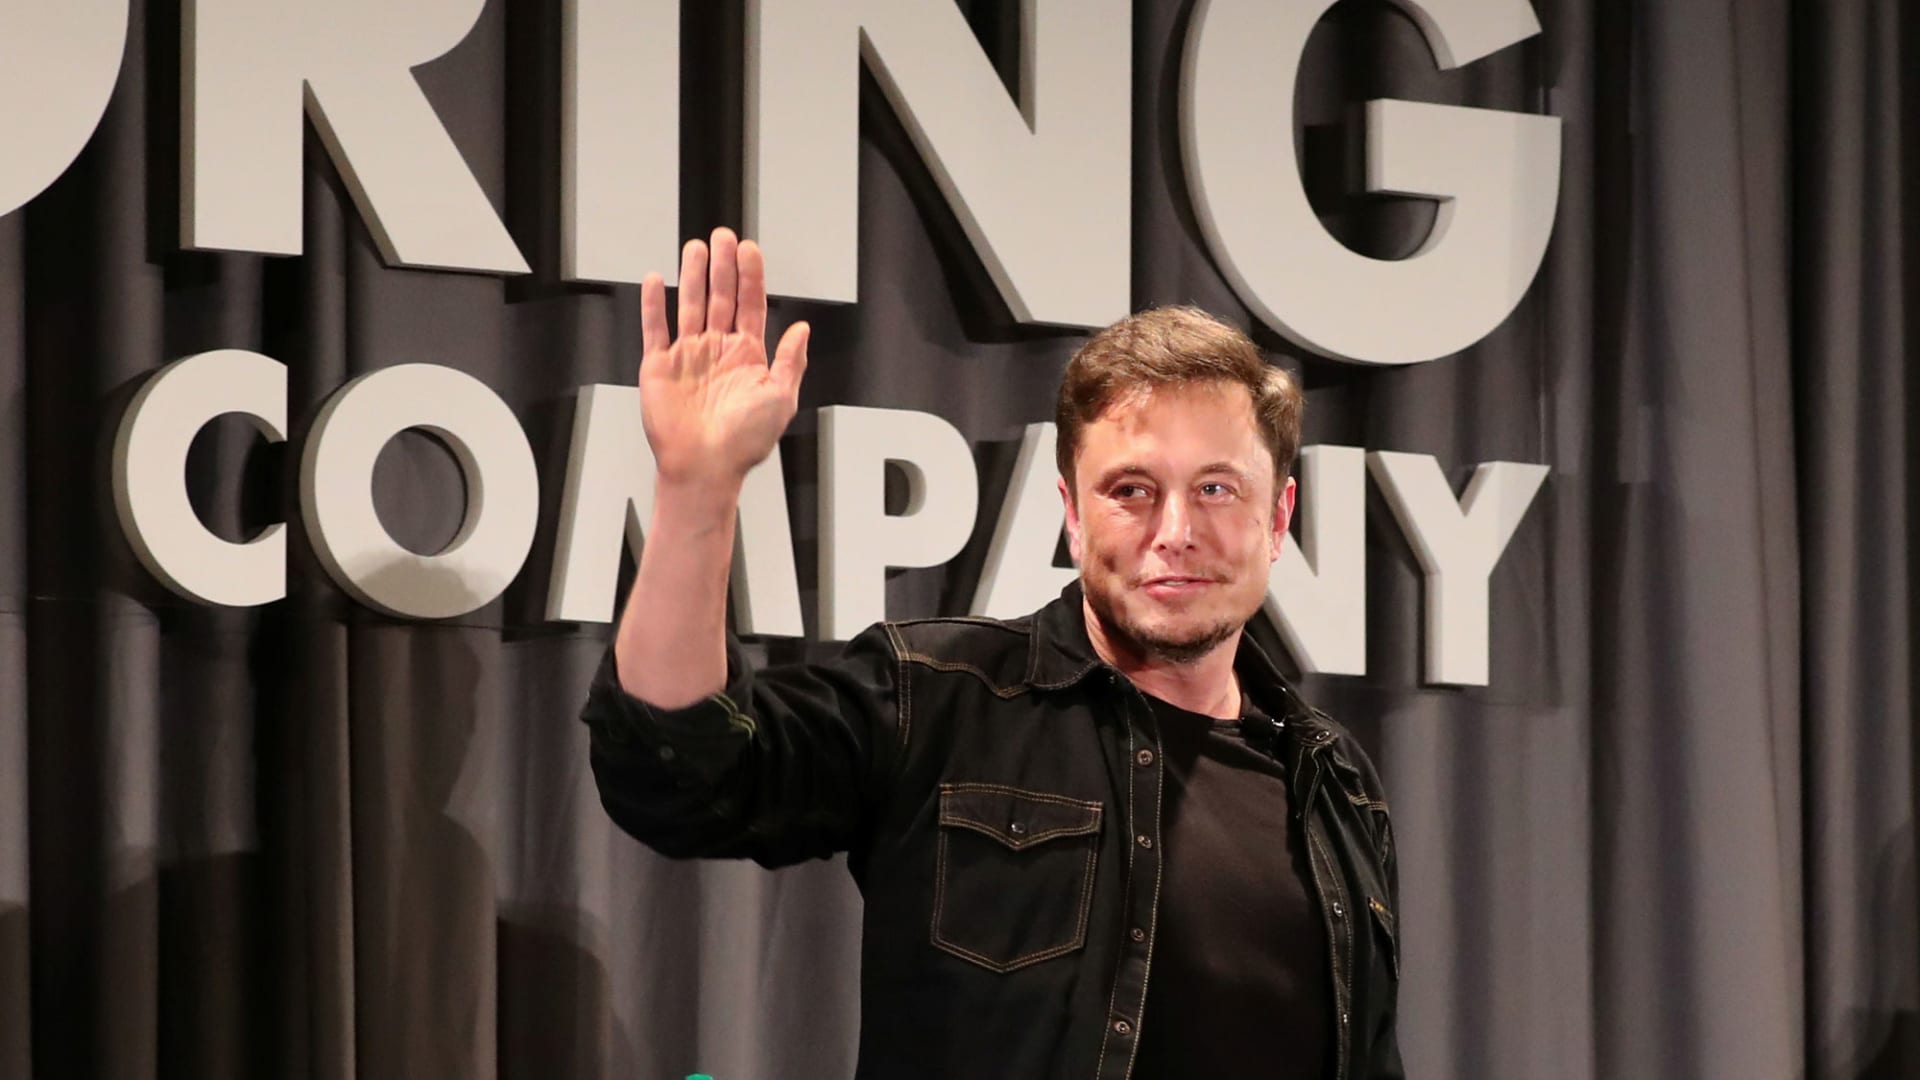 Morgan Stanley theorizes how Elon Musk’s tunnel company will one day work together with Tesla